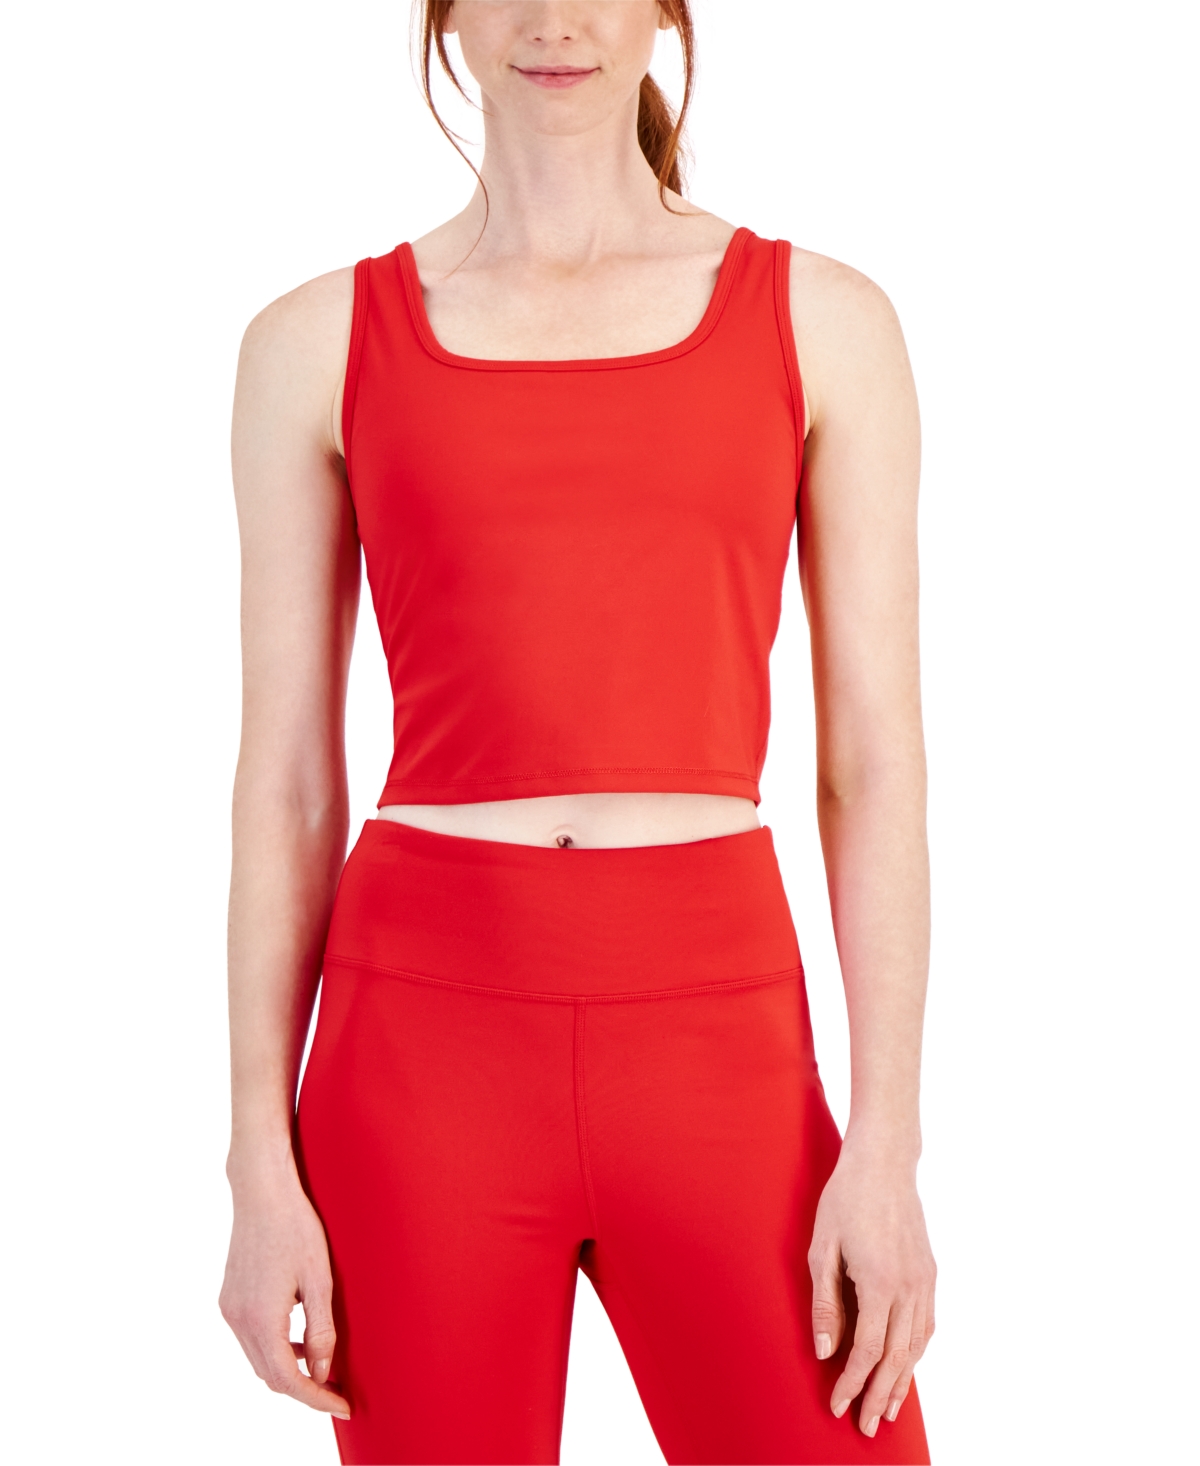 ID IDEOLOGY WOMEN'S CROPPED TANK TOP, CREATED FOR MACY'S